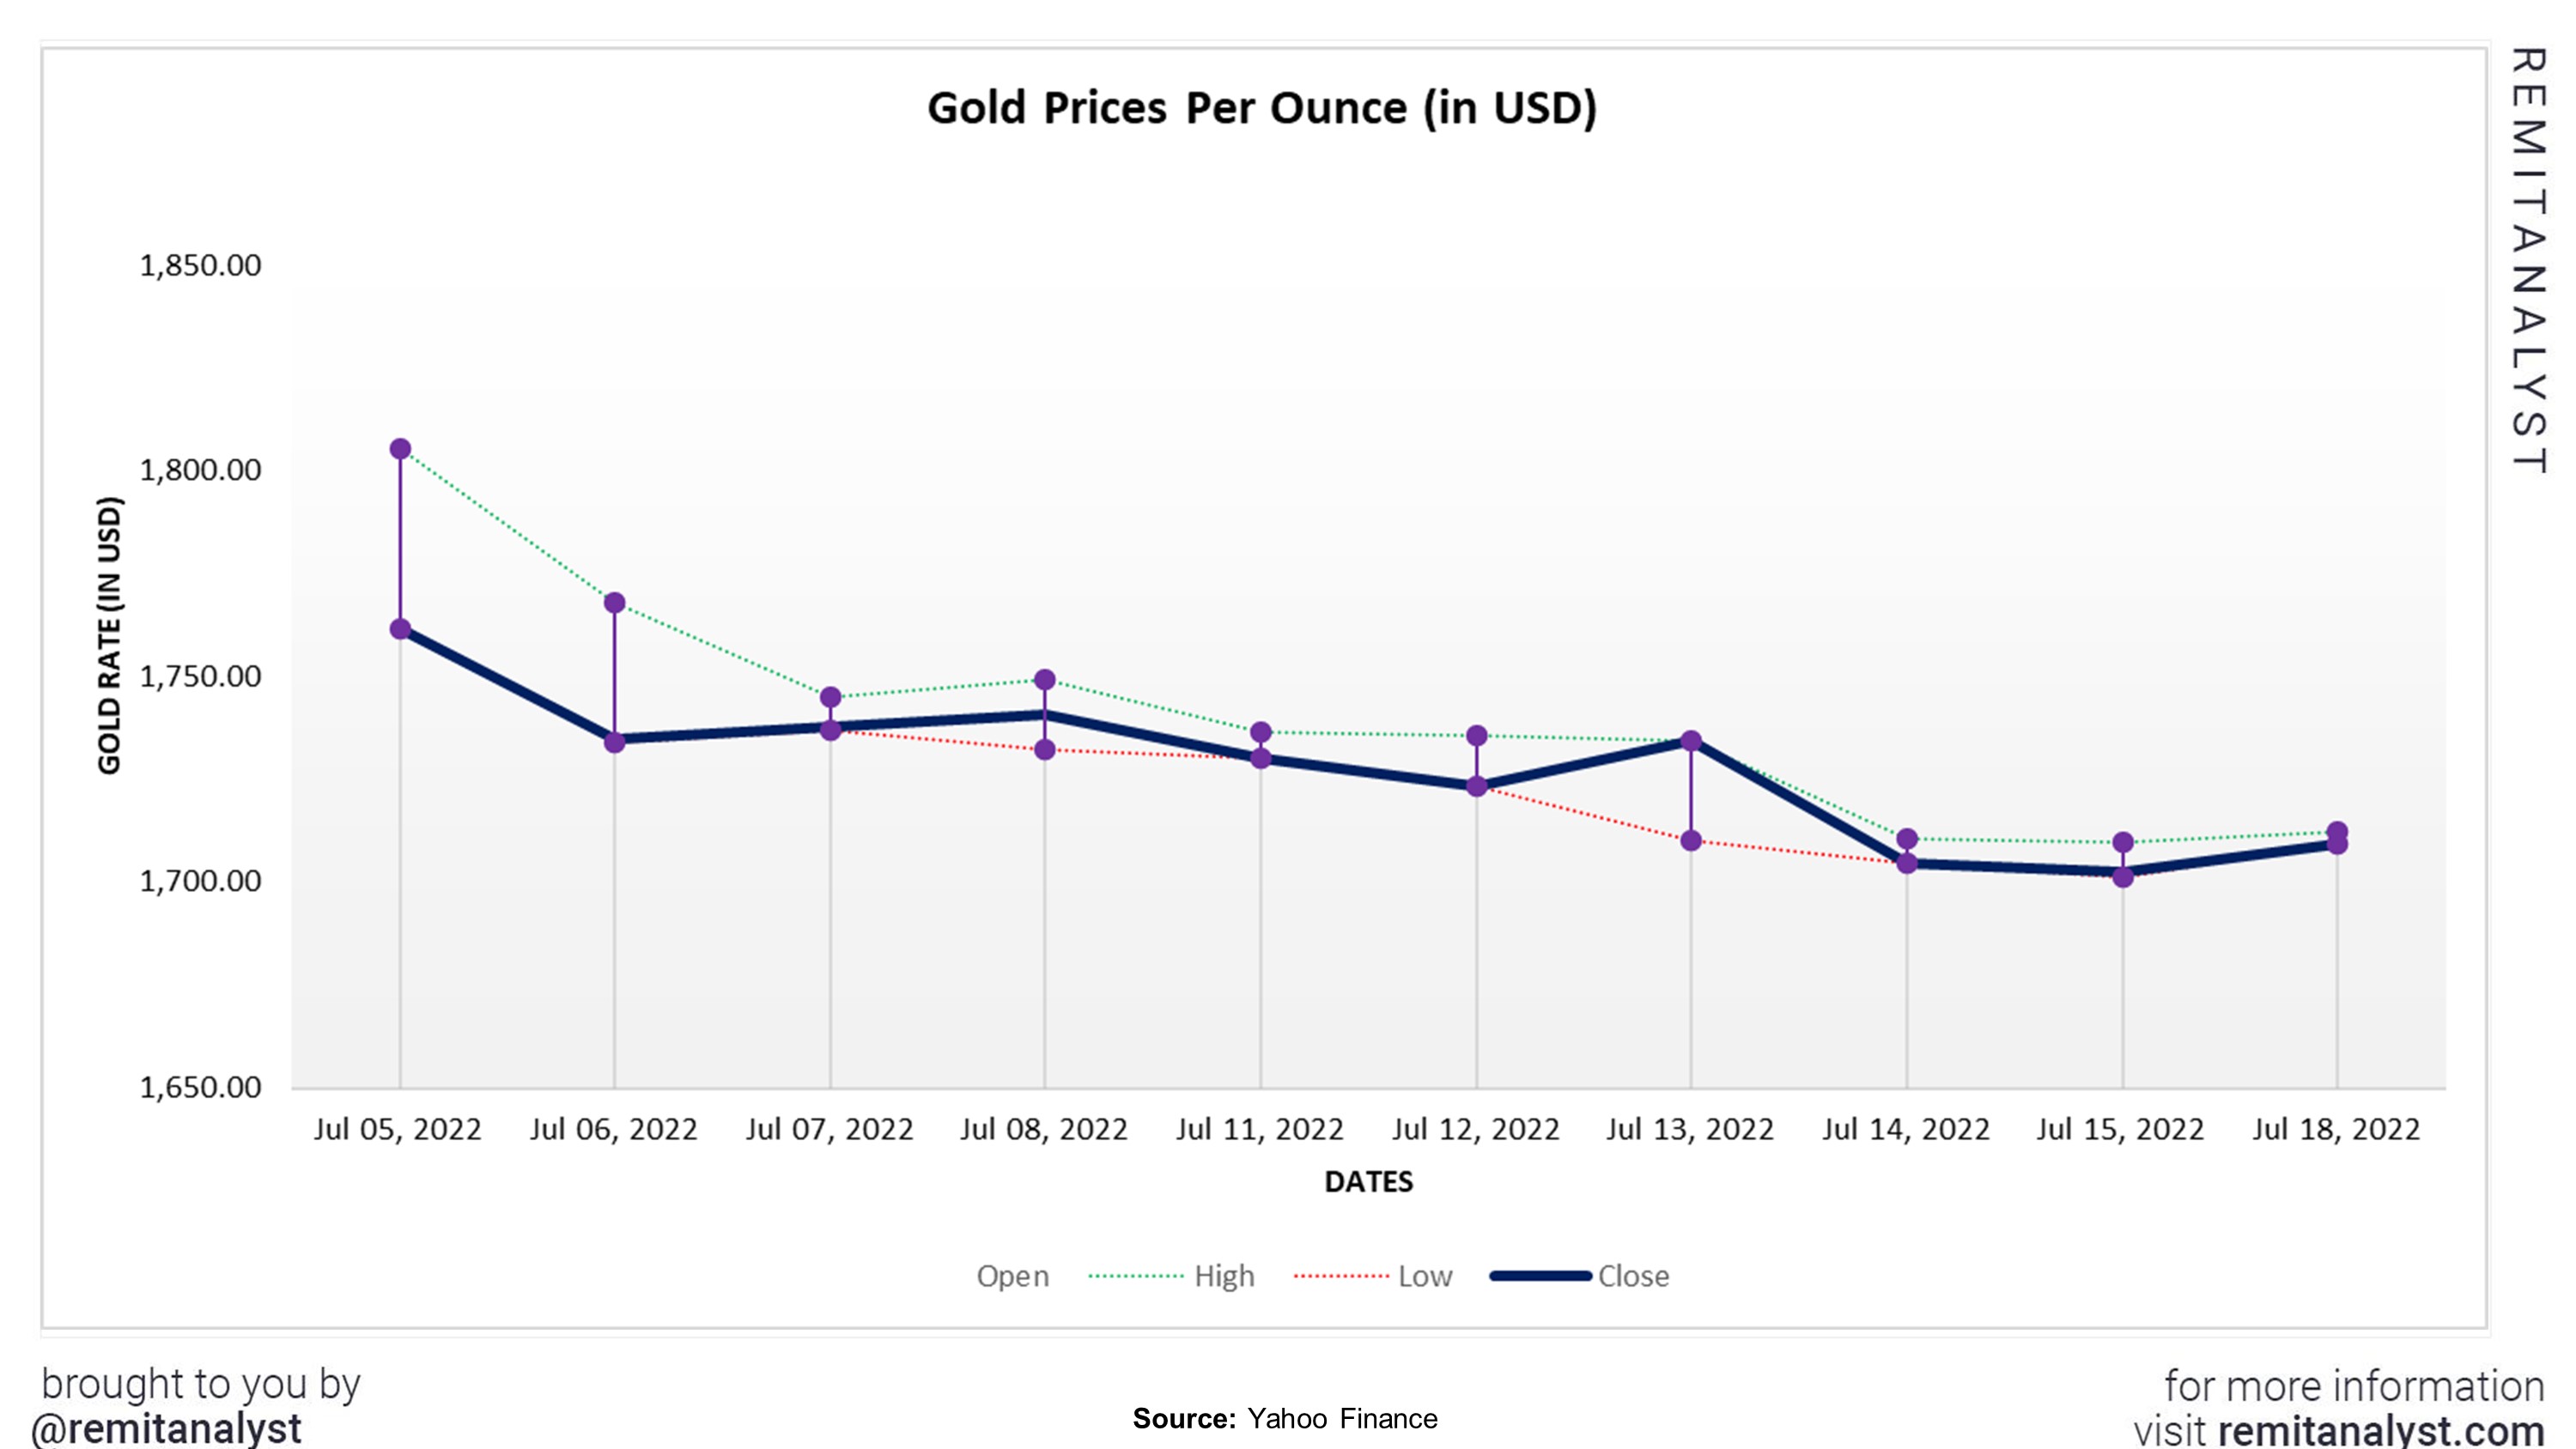 Gold_Prices_from_07-05-2022_to_07-18-2022 